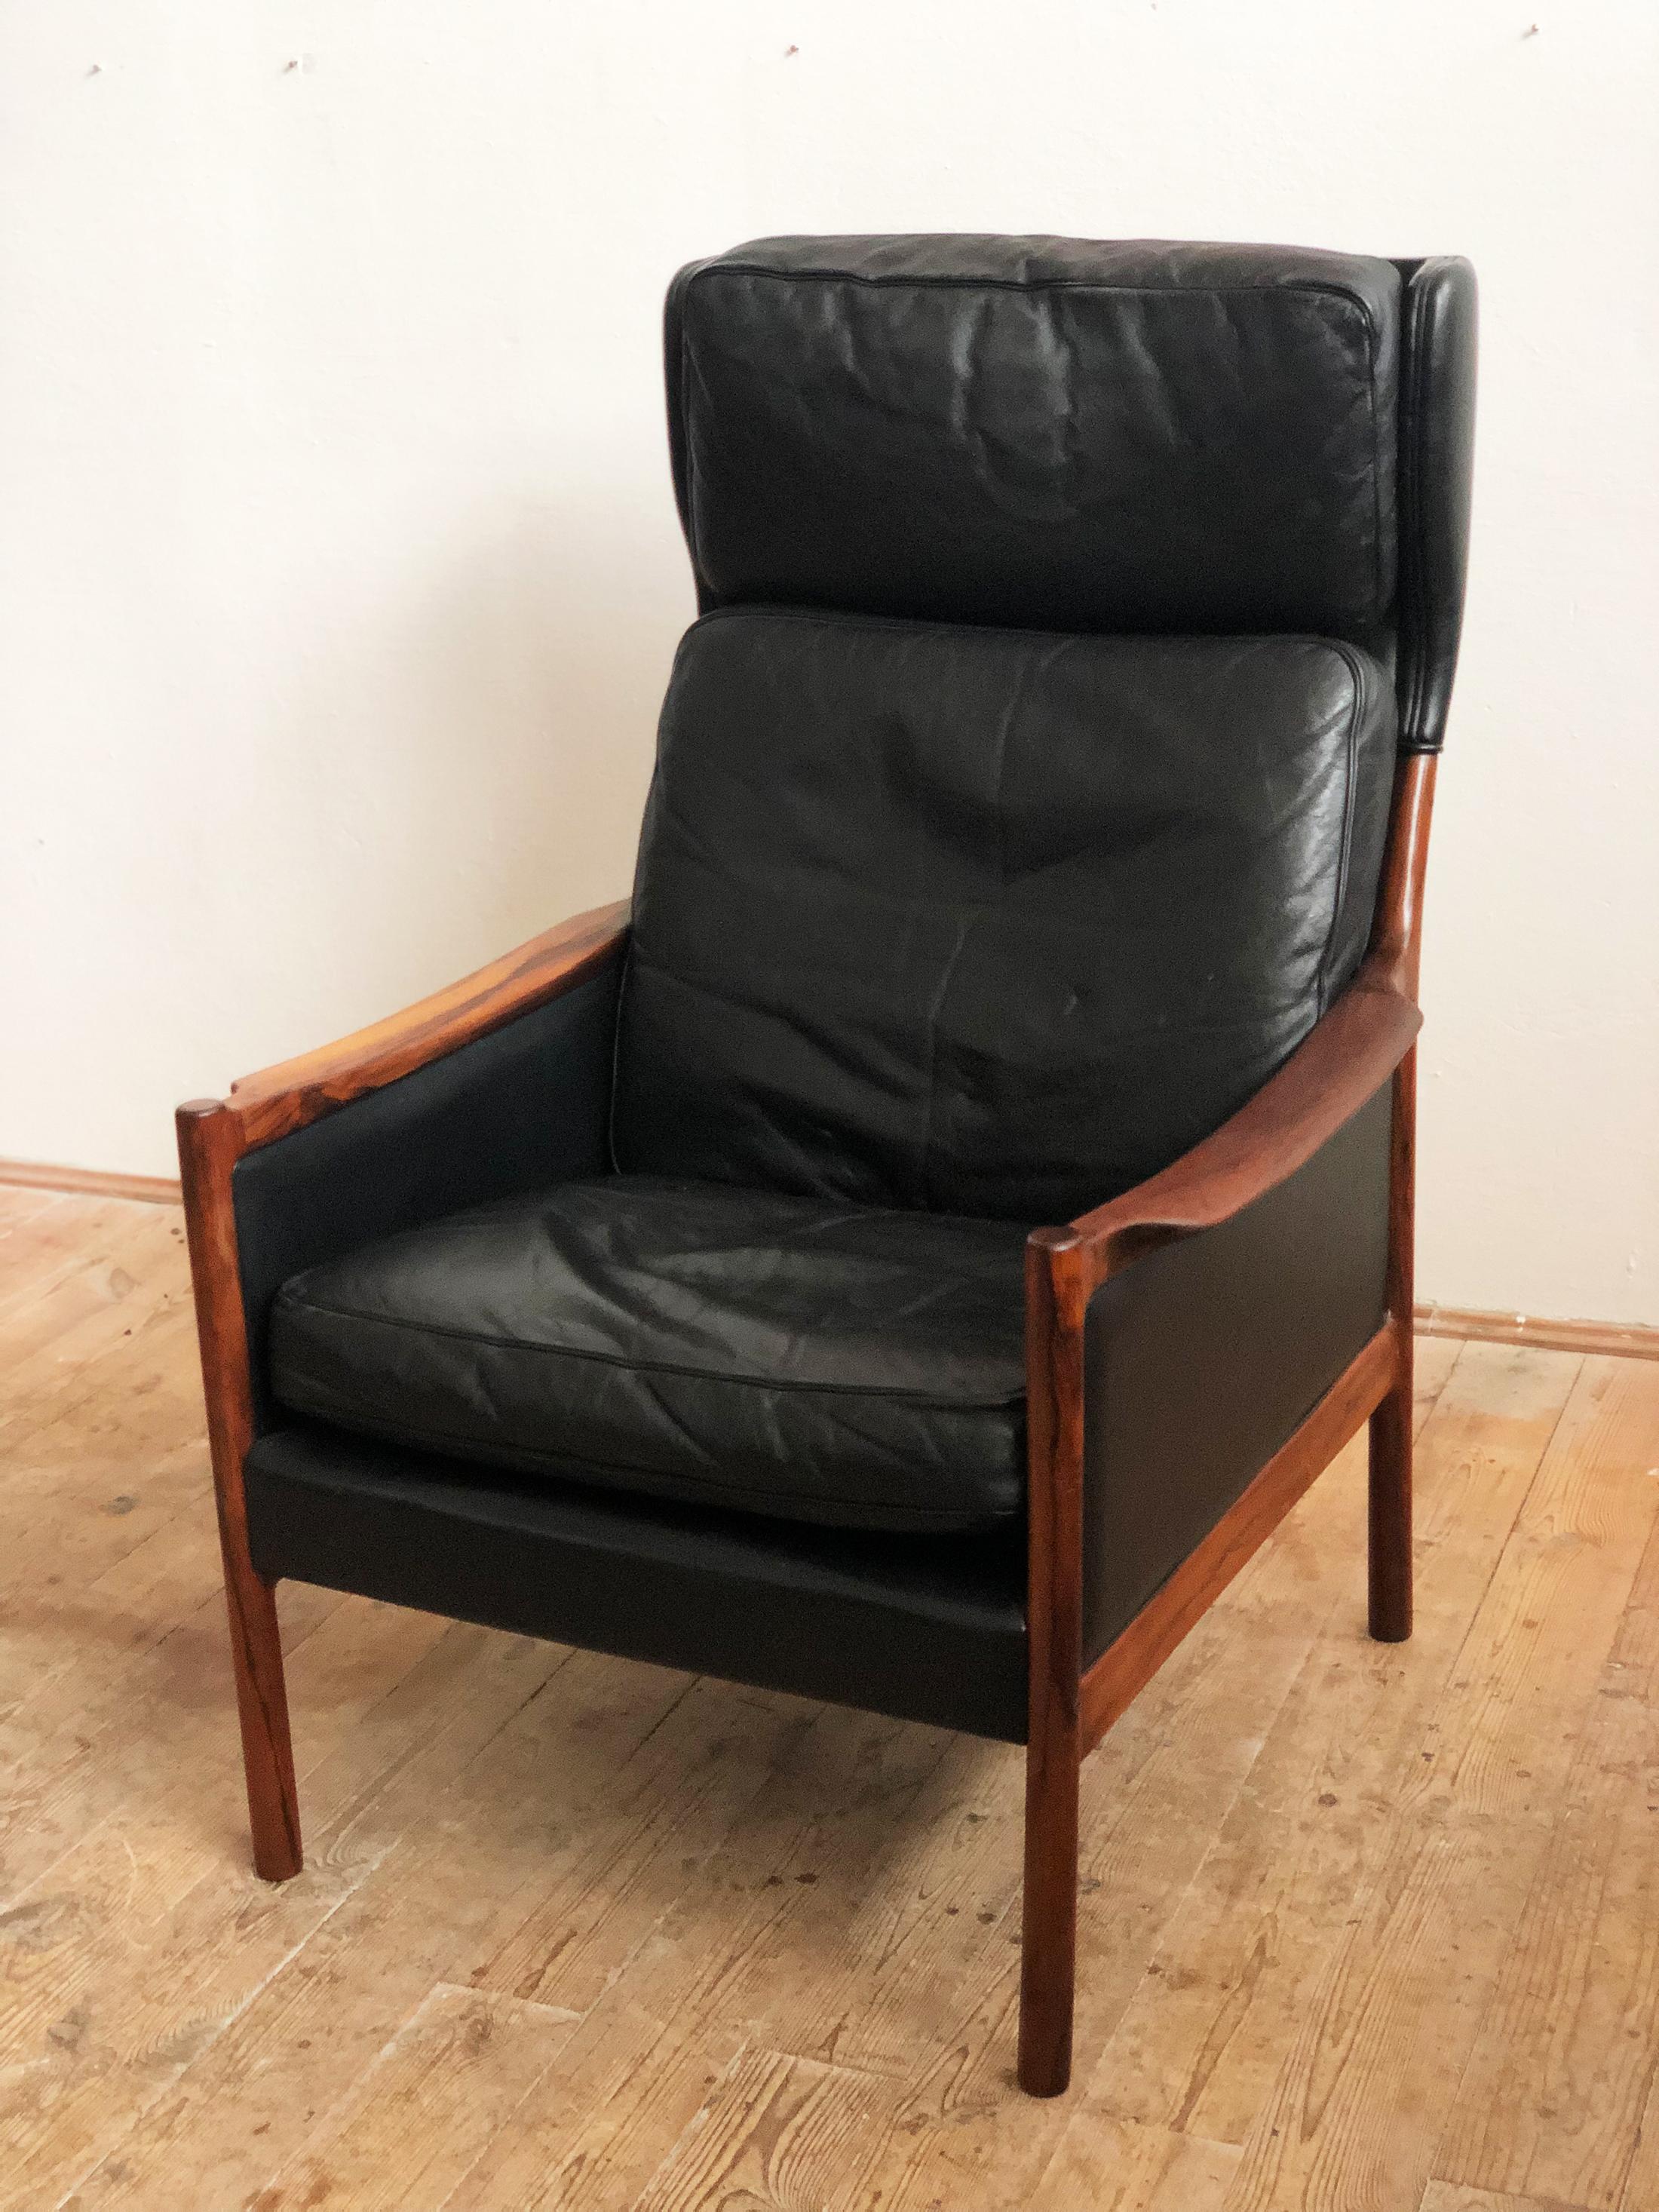 Danish Mid-Century Modern Rosewood and Black Leather Lounge Chair For Sale 10